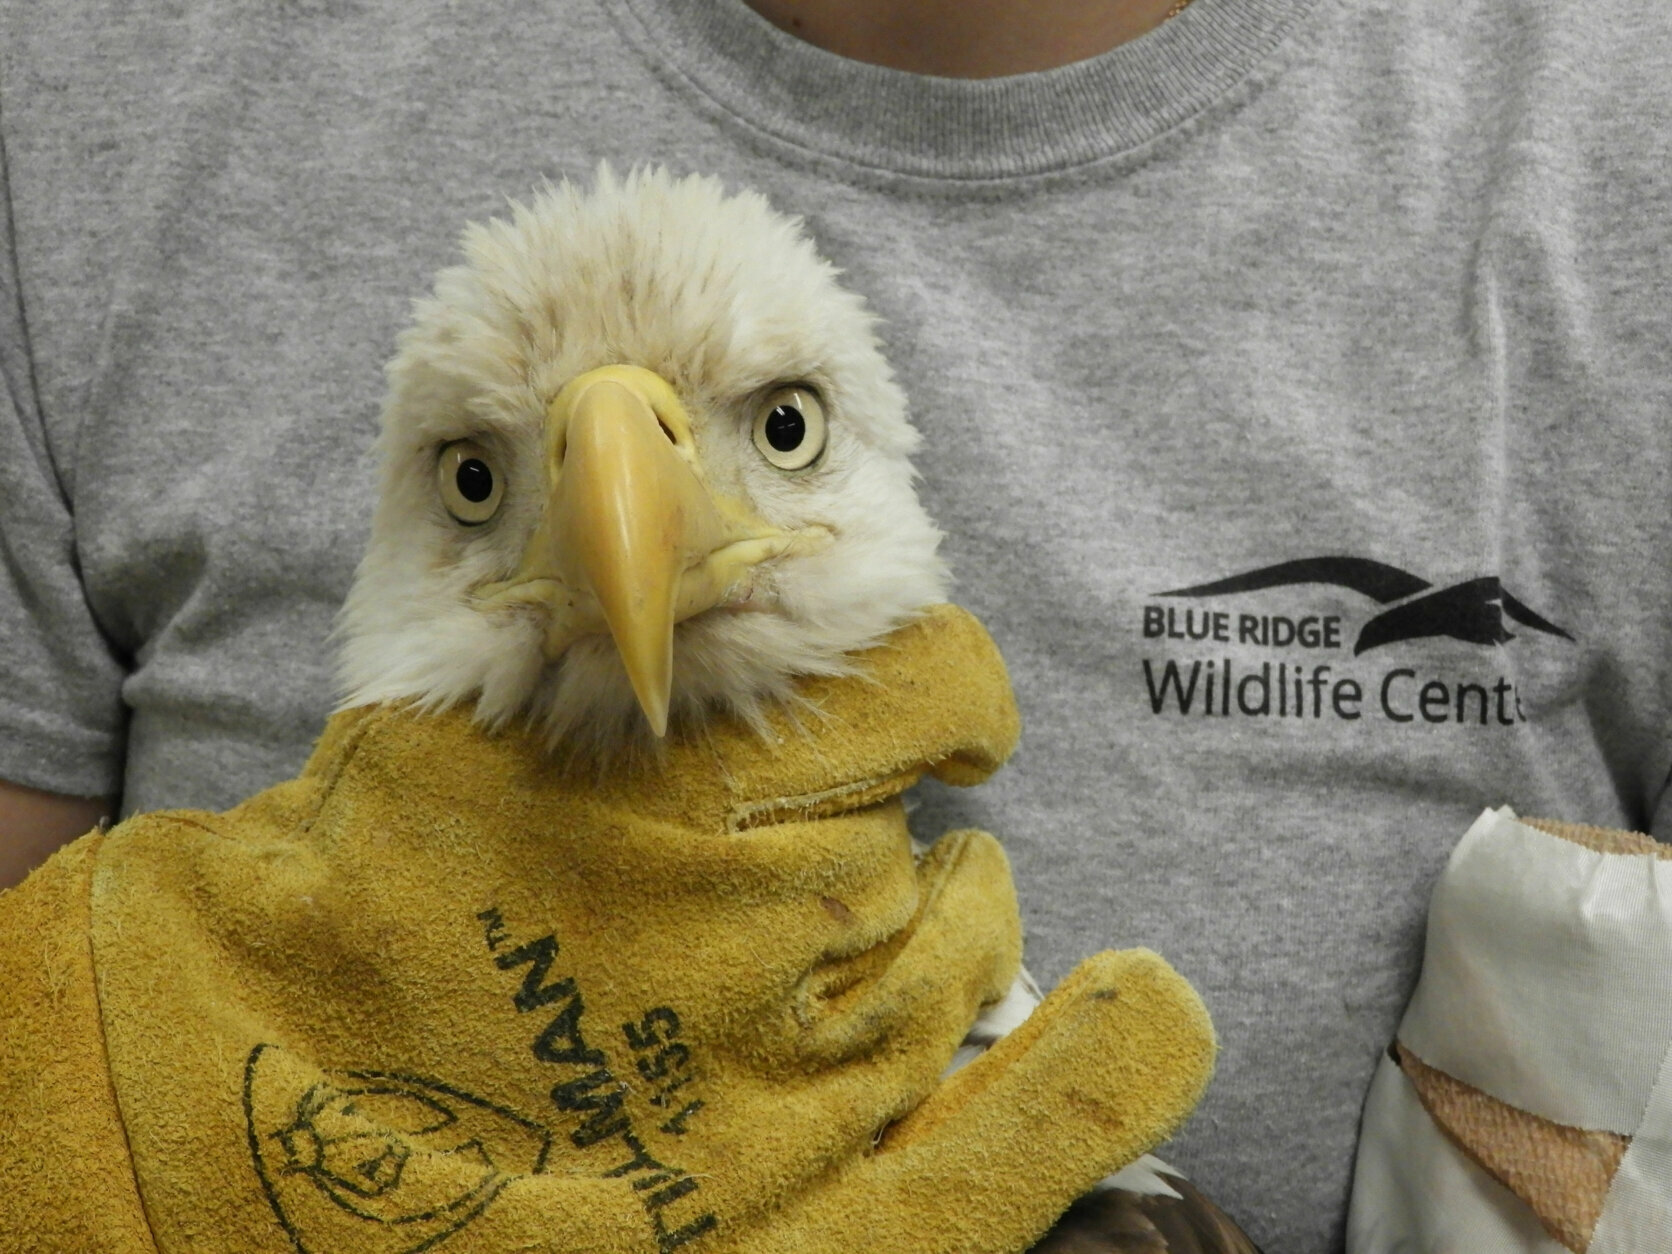 Jennifer Riley and her team are currently taking care of three bald eagles found in Stafford County and one in Loudoun County suffering from lead poisoning.